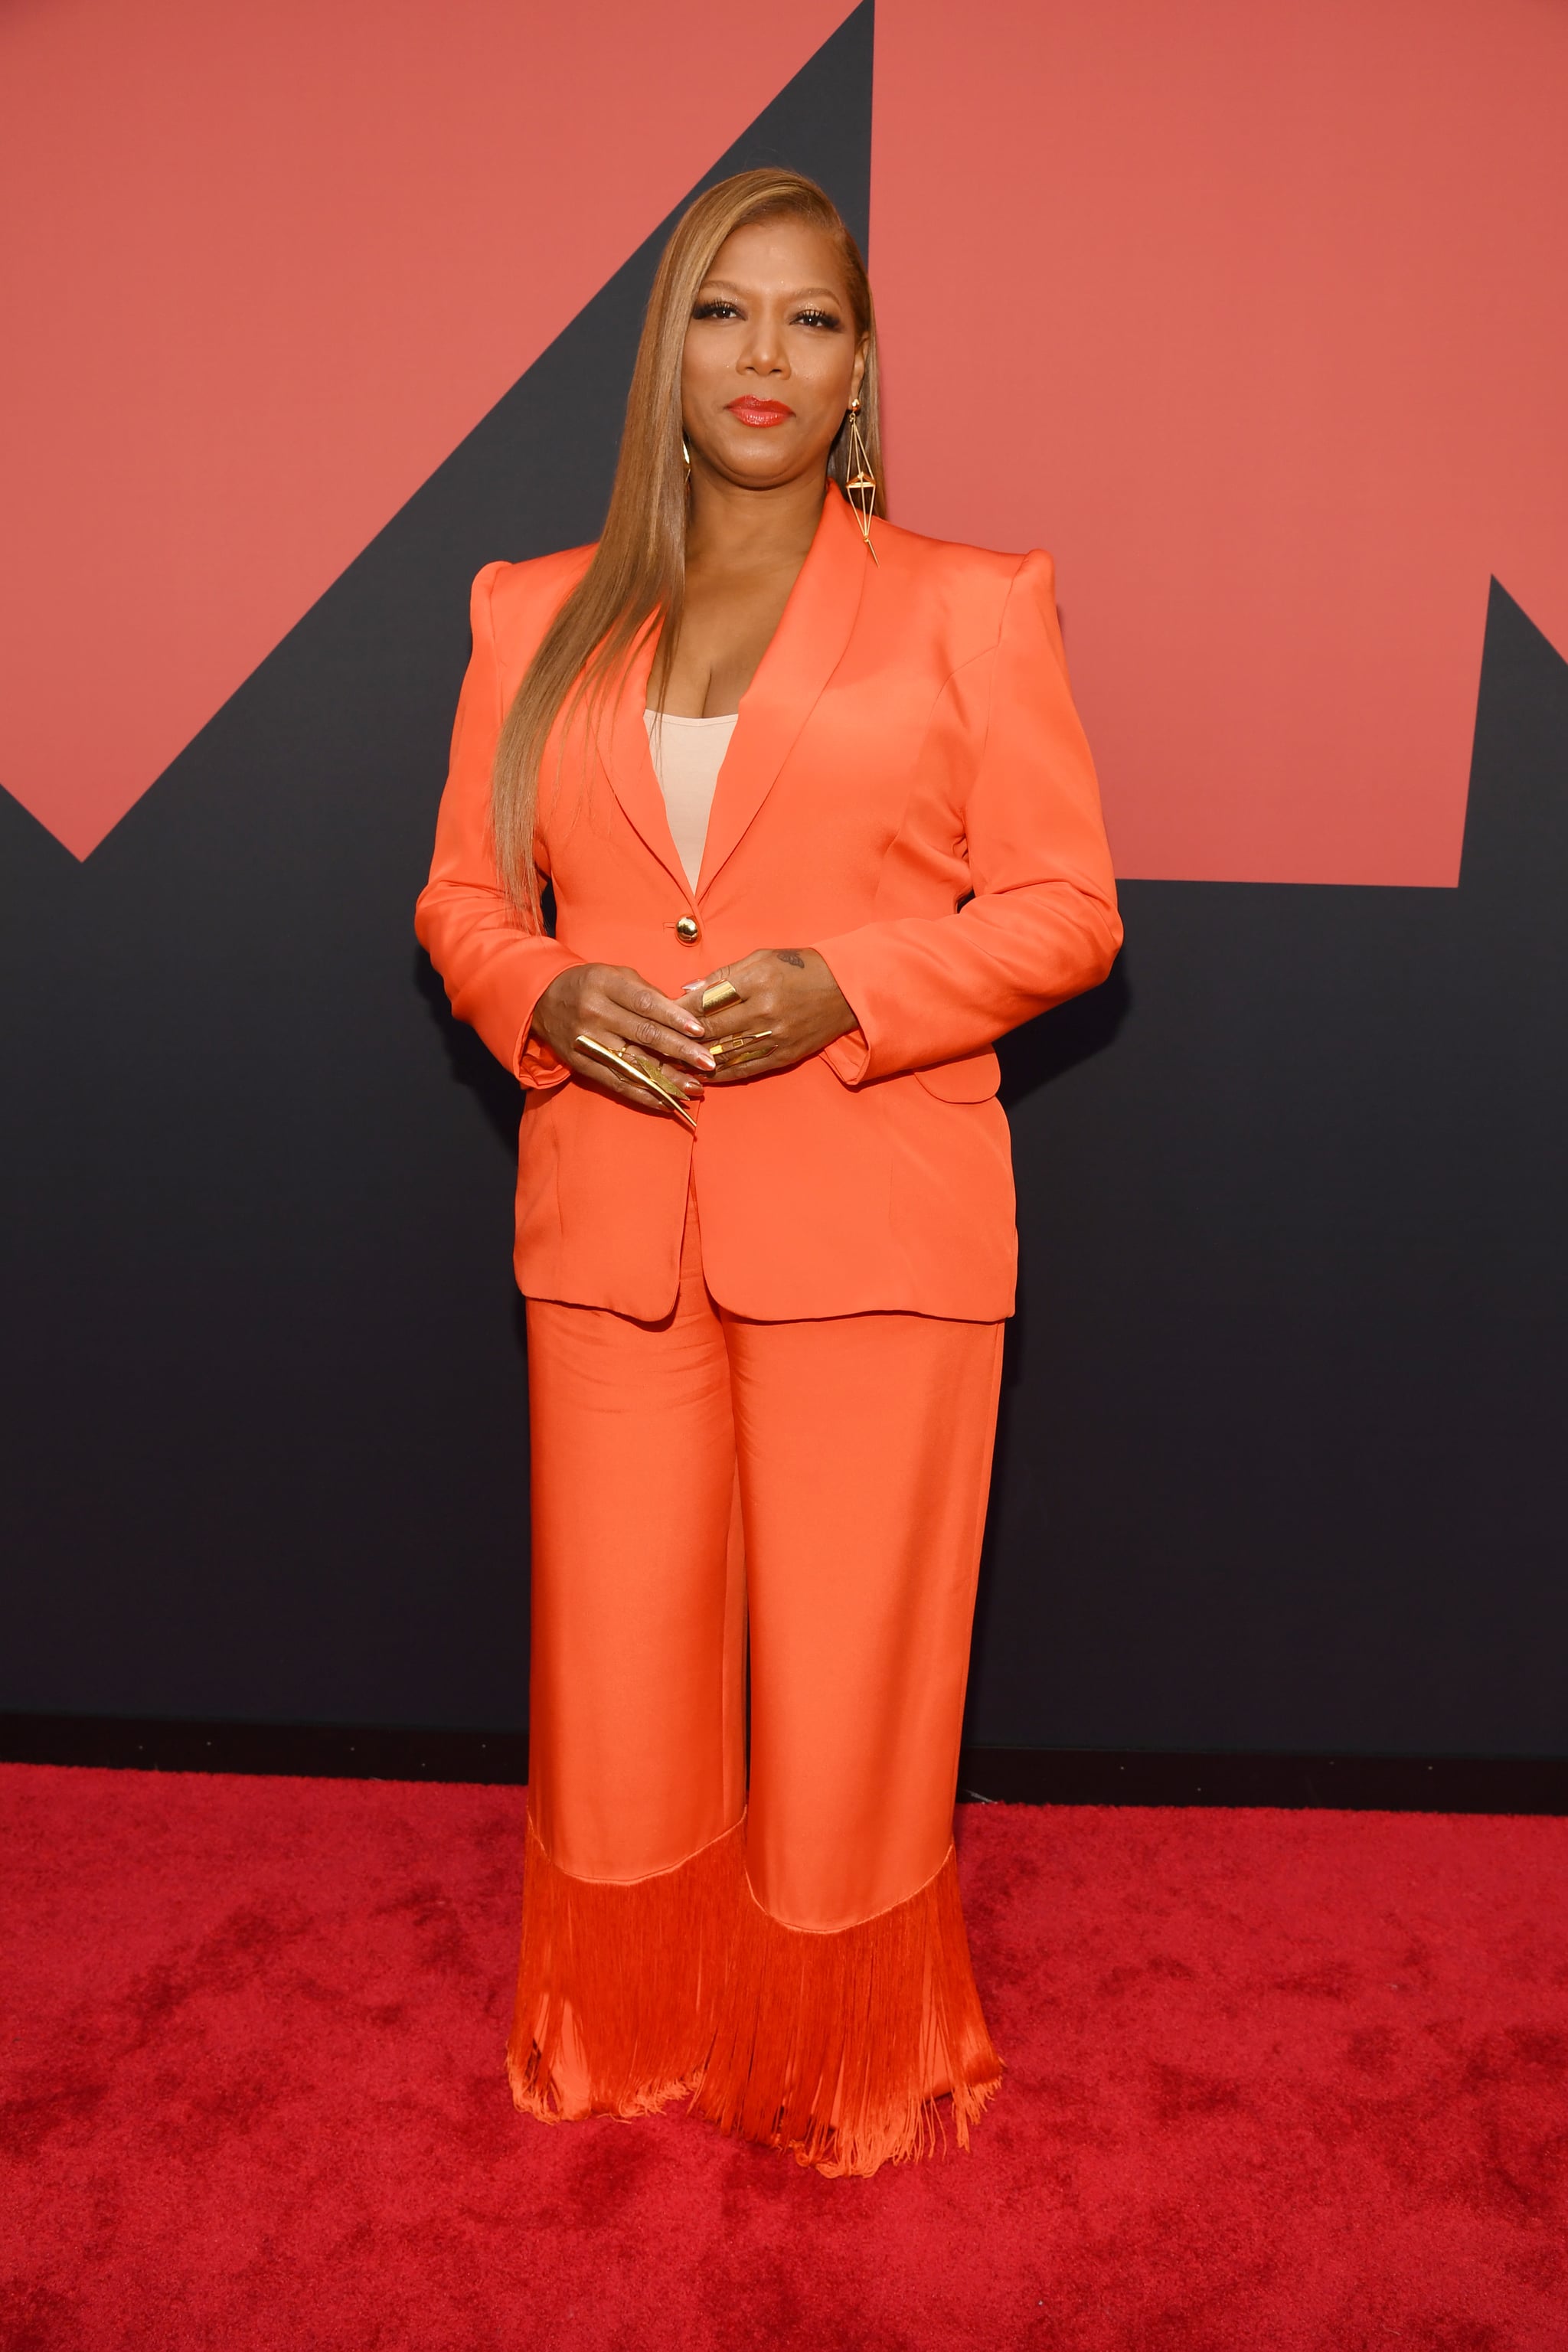 Queen Latifah at the 2019 MTV VMAs | Not to Be Dramatic or Anything, but  These VMAs Outfits Are the Definition of Fierce Fashion | POPSUGAR Fashion  Photo 41